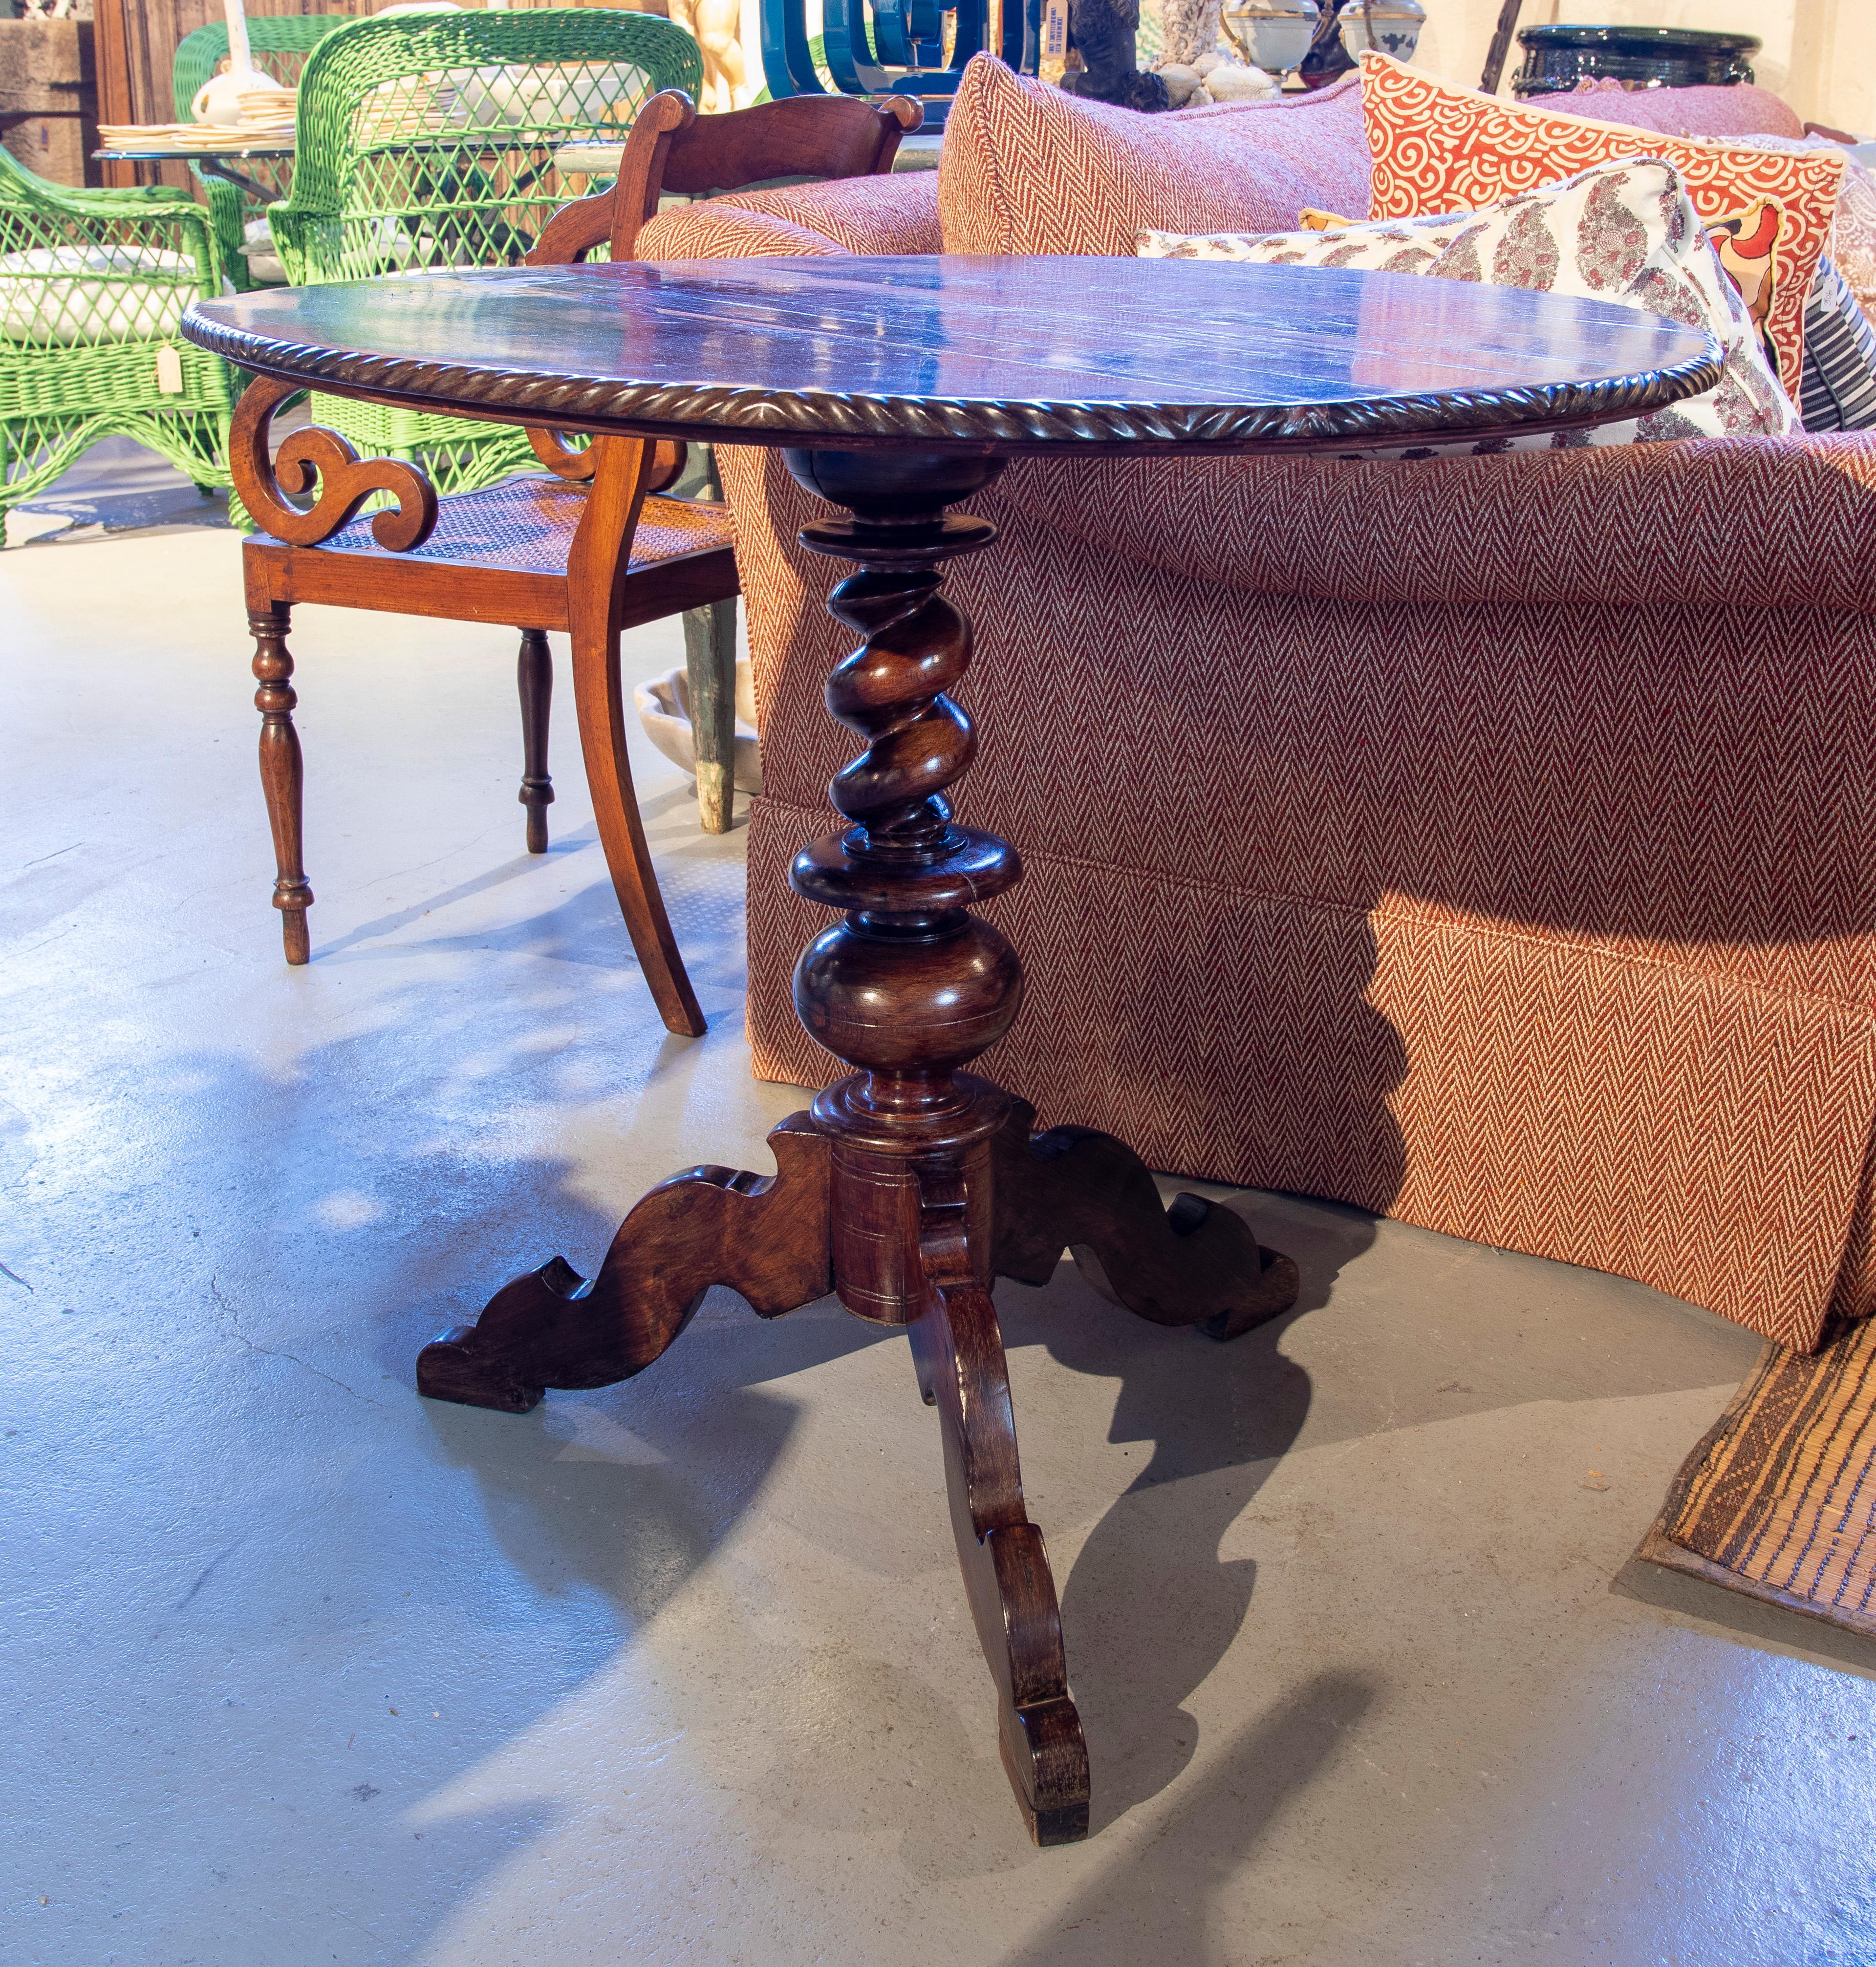 19th century Portuguese rosewood table with oval top and leg in the middle.